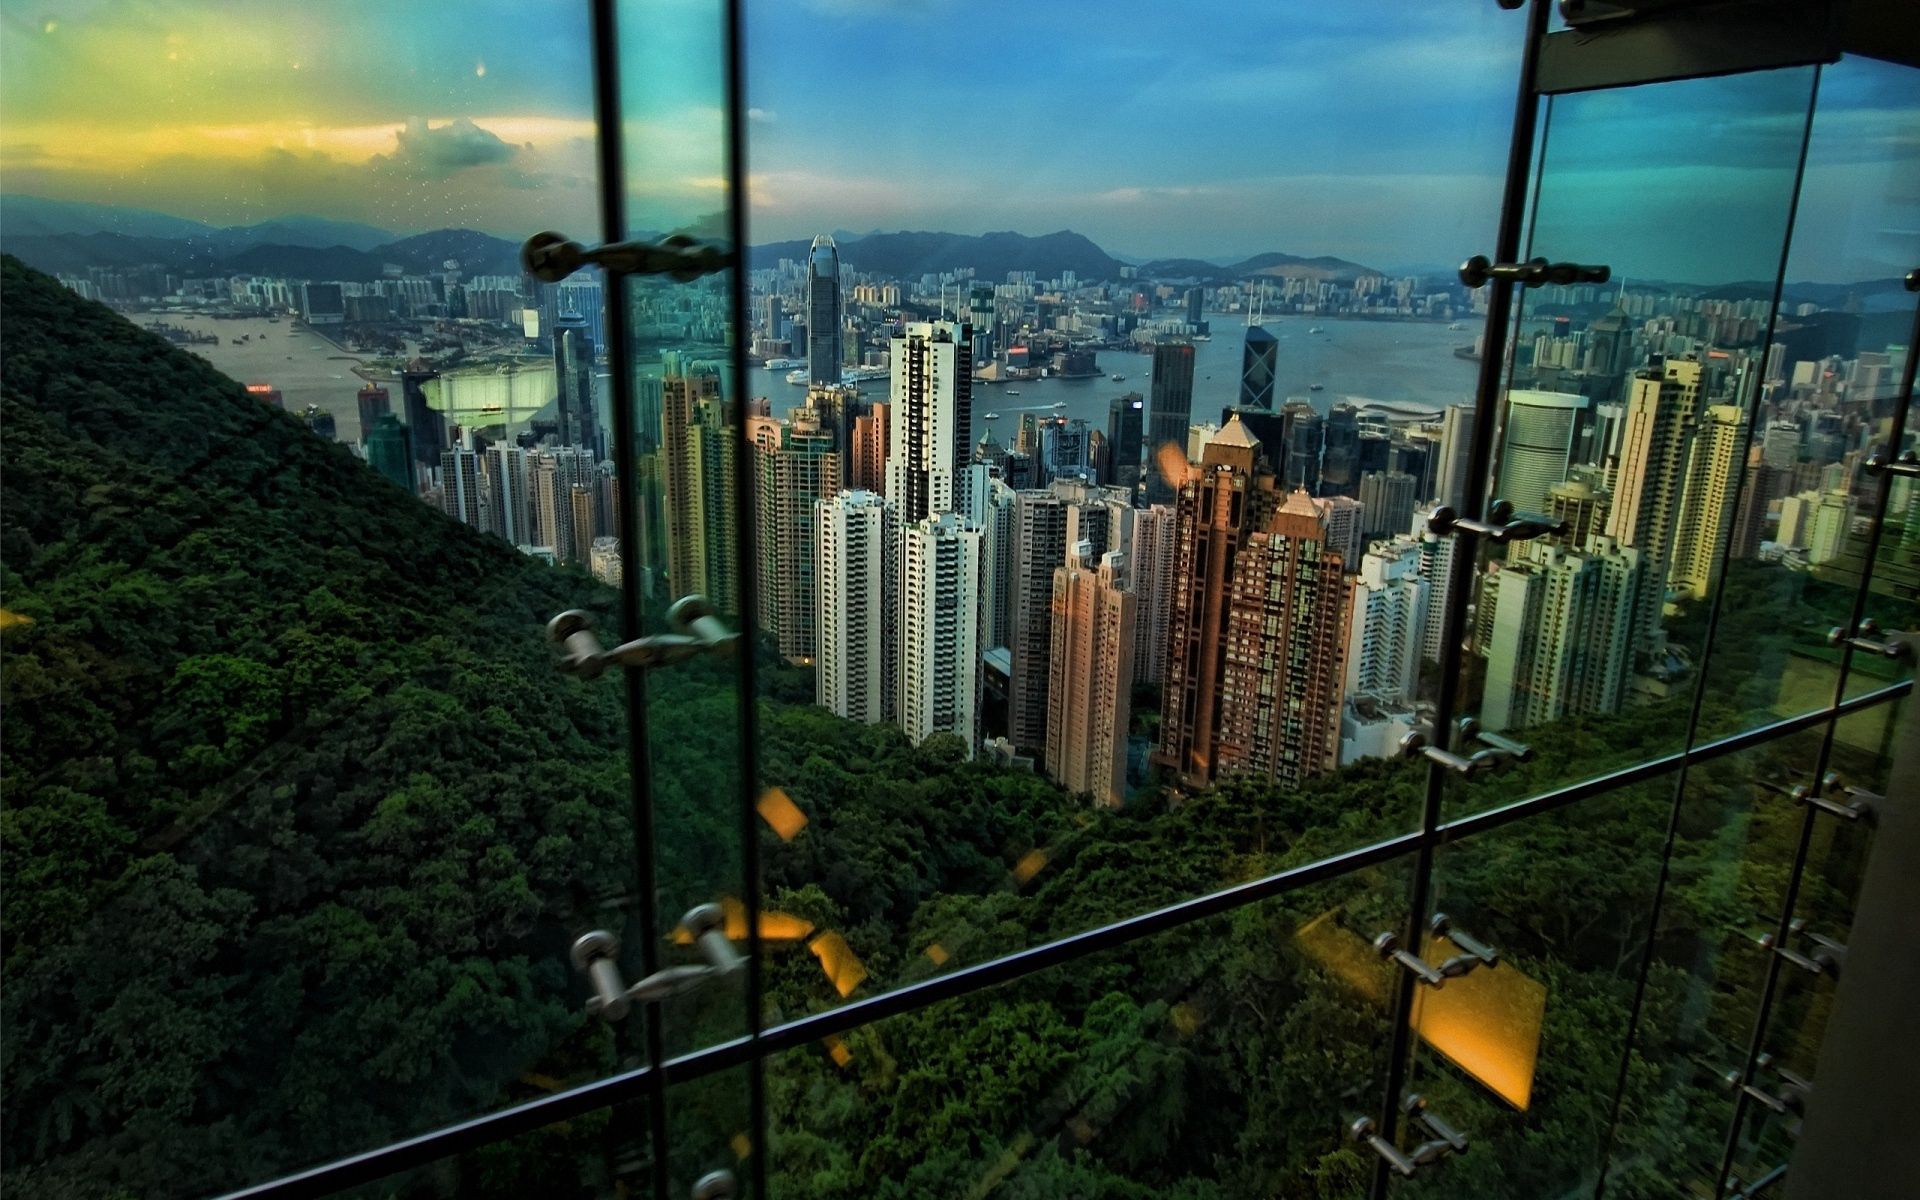 skyscrapers, cities, evening, hong kong, hong kong s a r, view from the window 8K